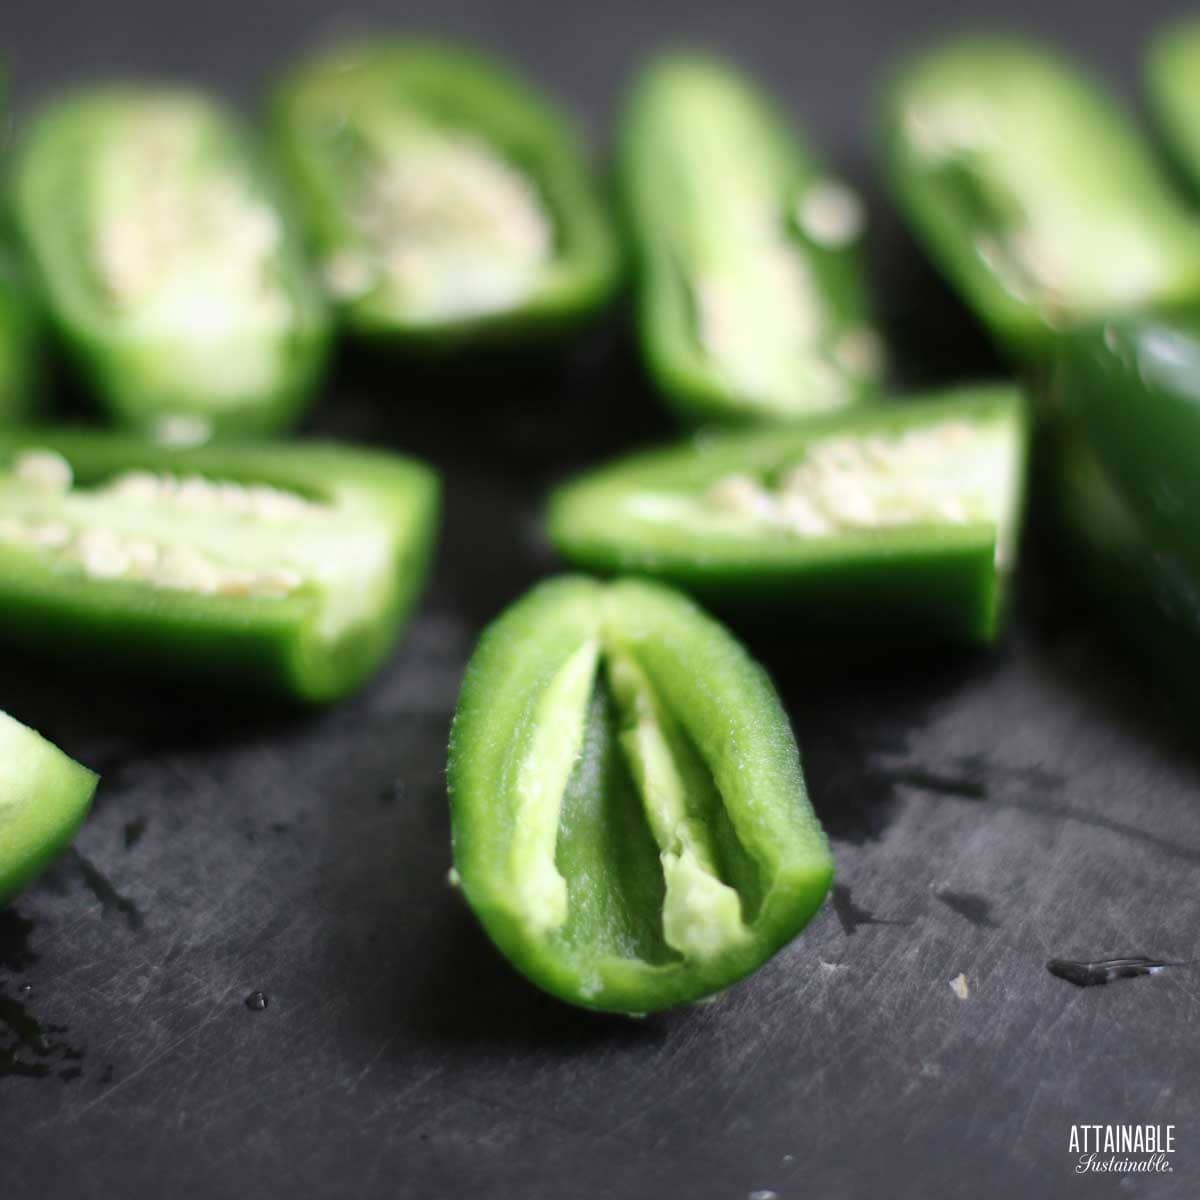 halved jalapeno peppers.